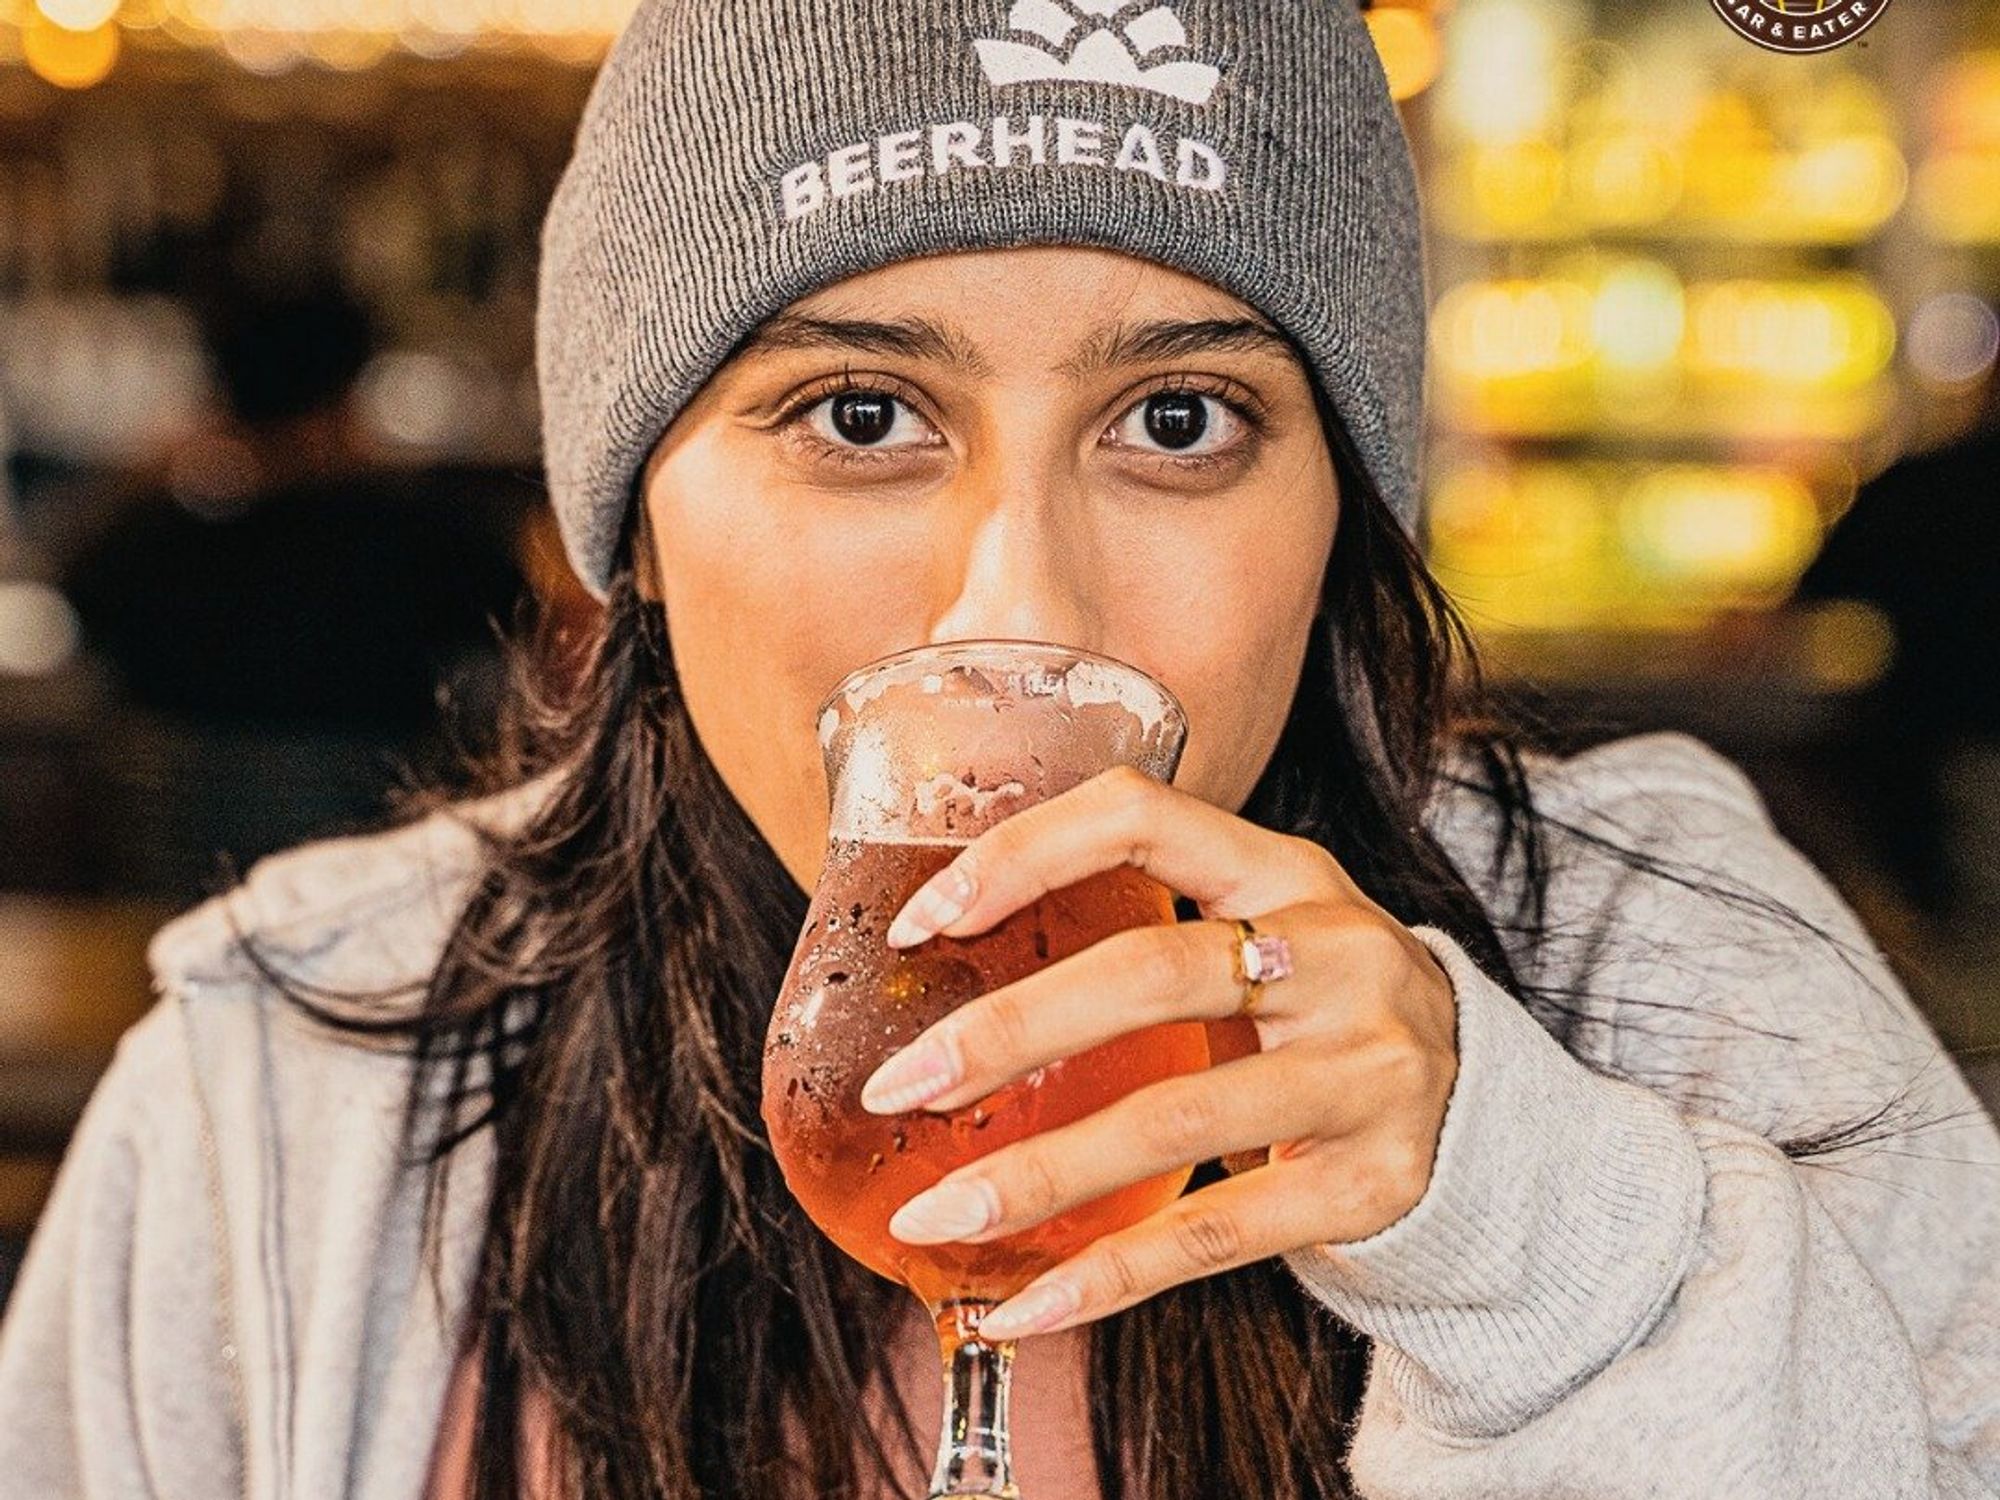 ​Beerhead Bar and Eatery, a craft beer-centric restaurant based in the Midwest, began the new year by opening their first Texas location in northwest San Antonio.